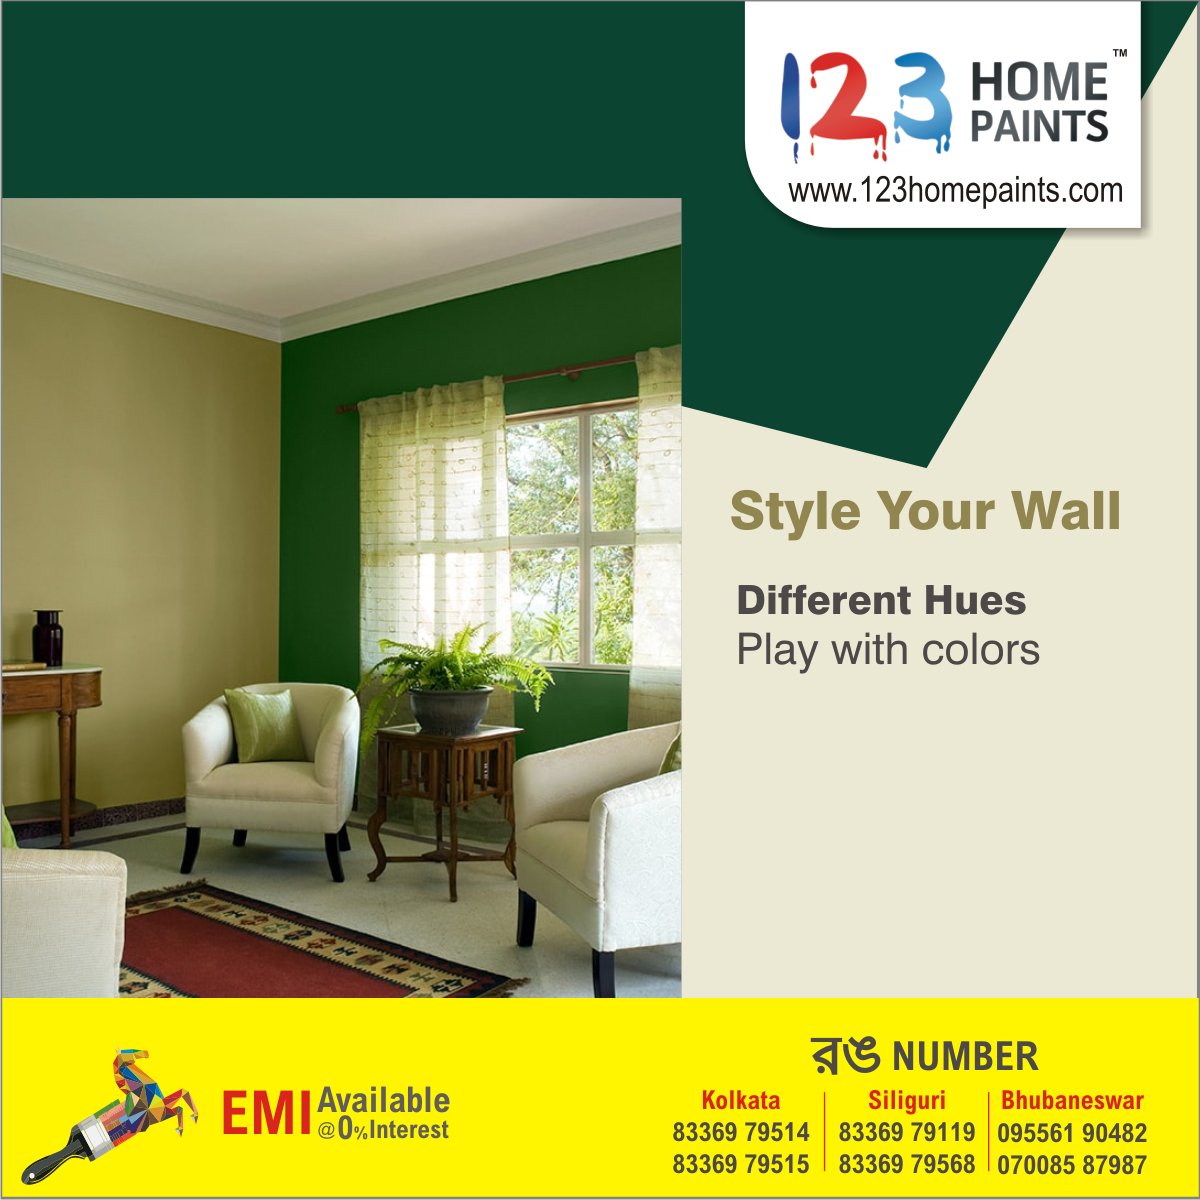 #123Homepaints
#Style wall with #Hues
#Playwithcolors
Call #RongNumber for efficient painting